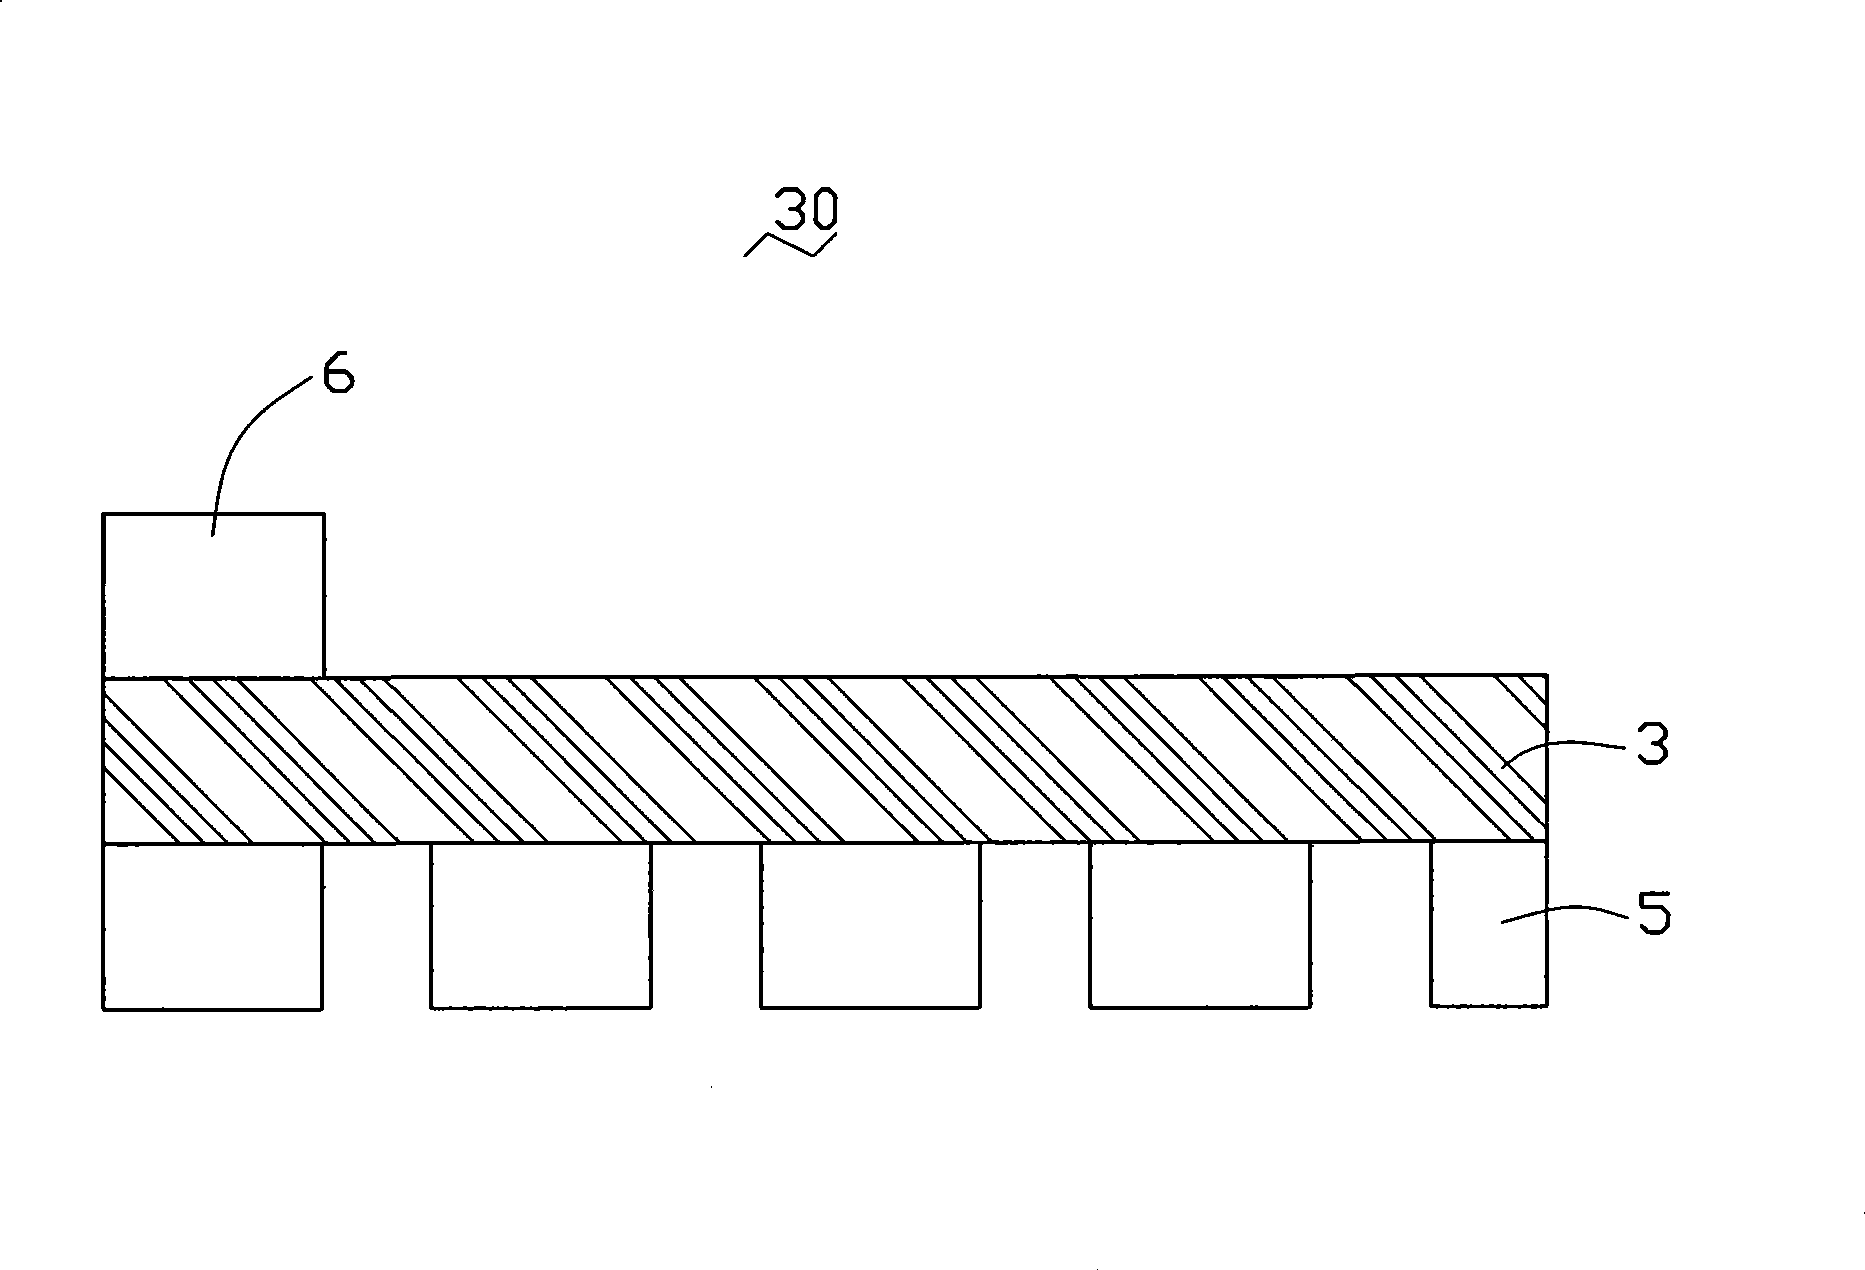 Copper coated substrate material and flexible circuit board having the copper coated substrate material